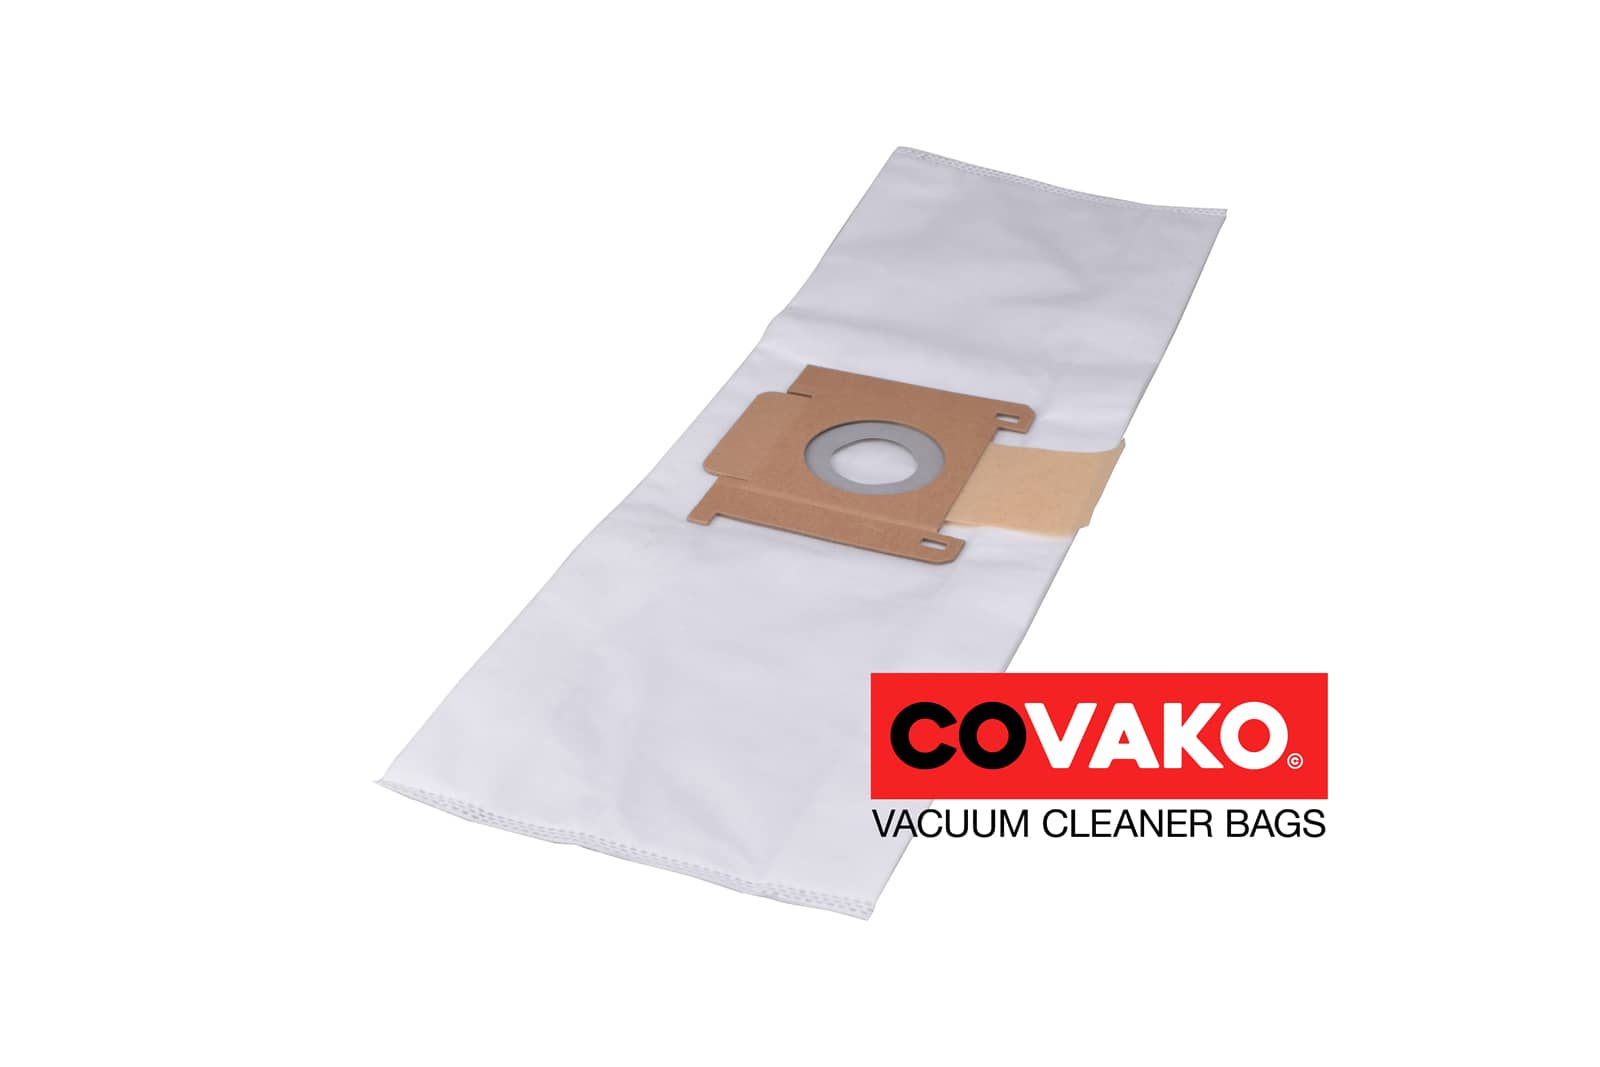 I-vac tito 6 / Synthesis - I-vac vacuum cleaner bags